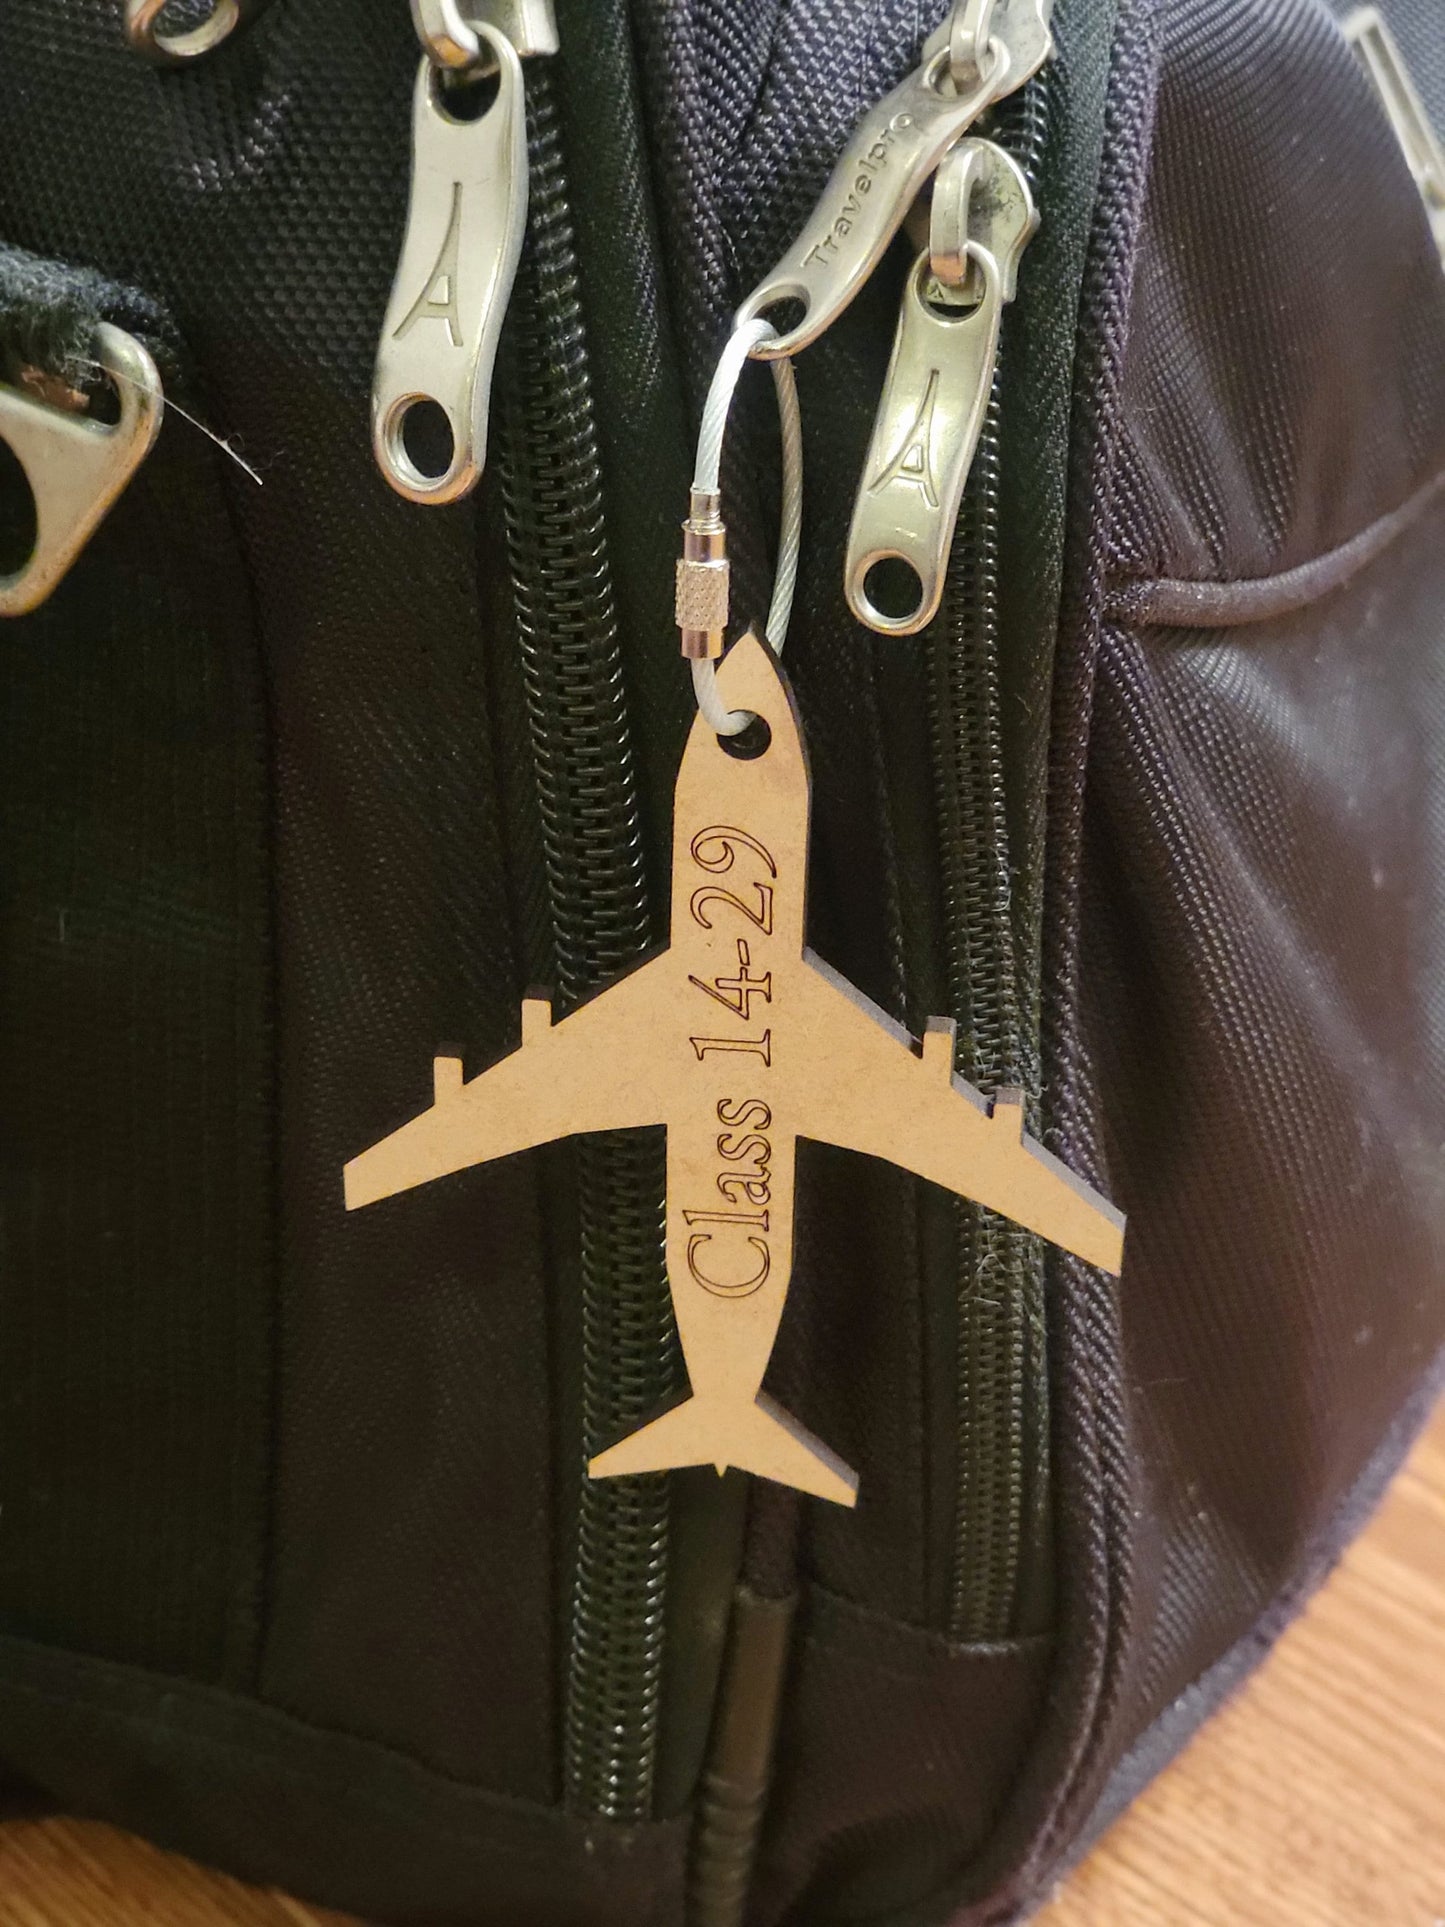 Bag Tag-Gift for Flight Attendant-Flight Crew- Personalized! Made of wood-Flight Attendant Luggage Tag